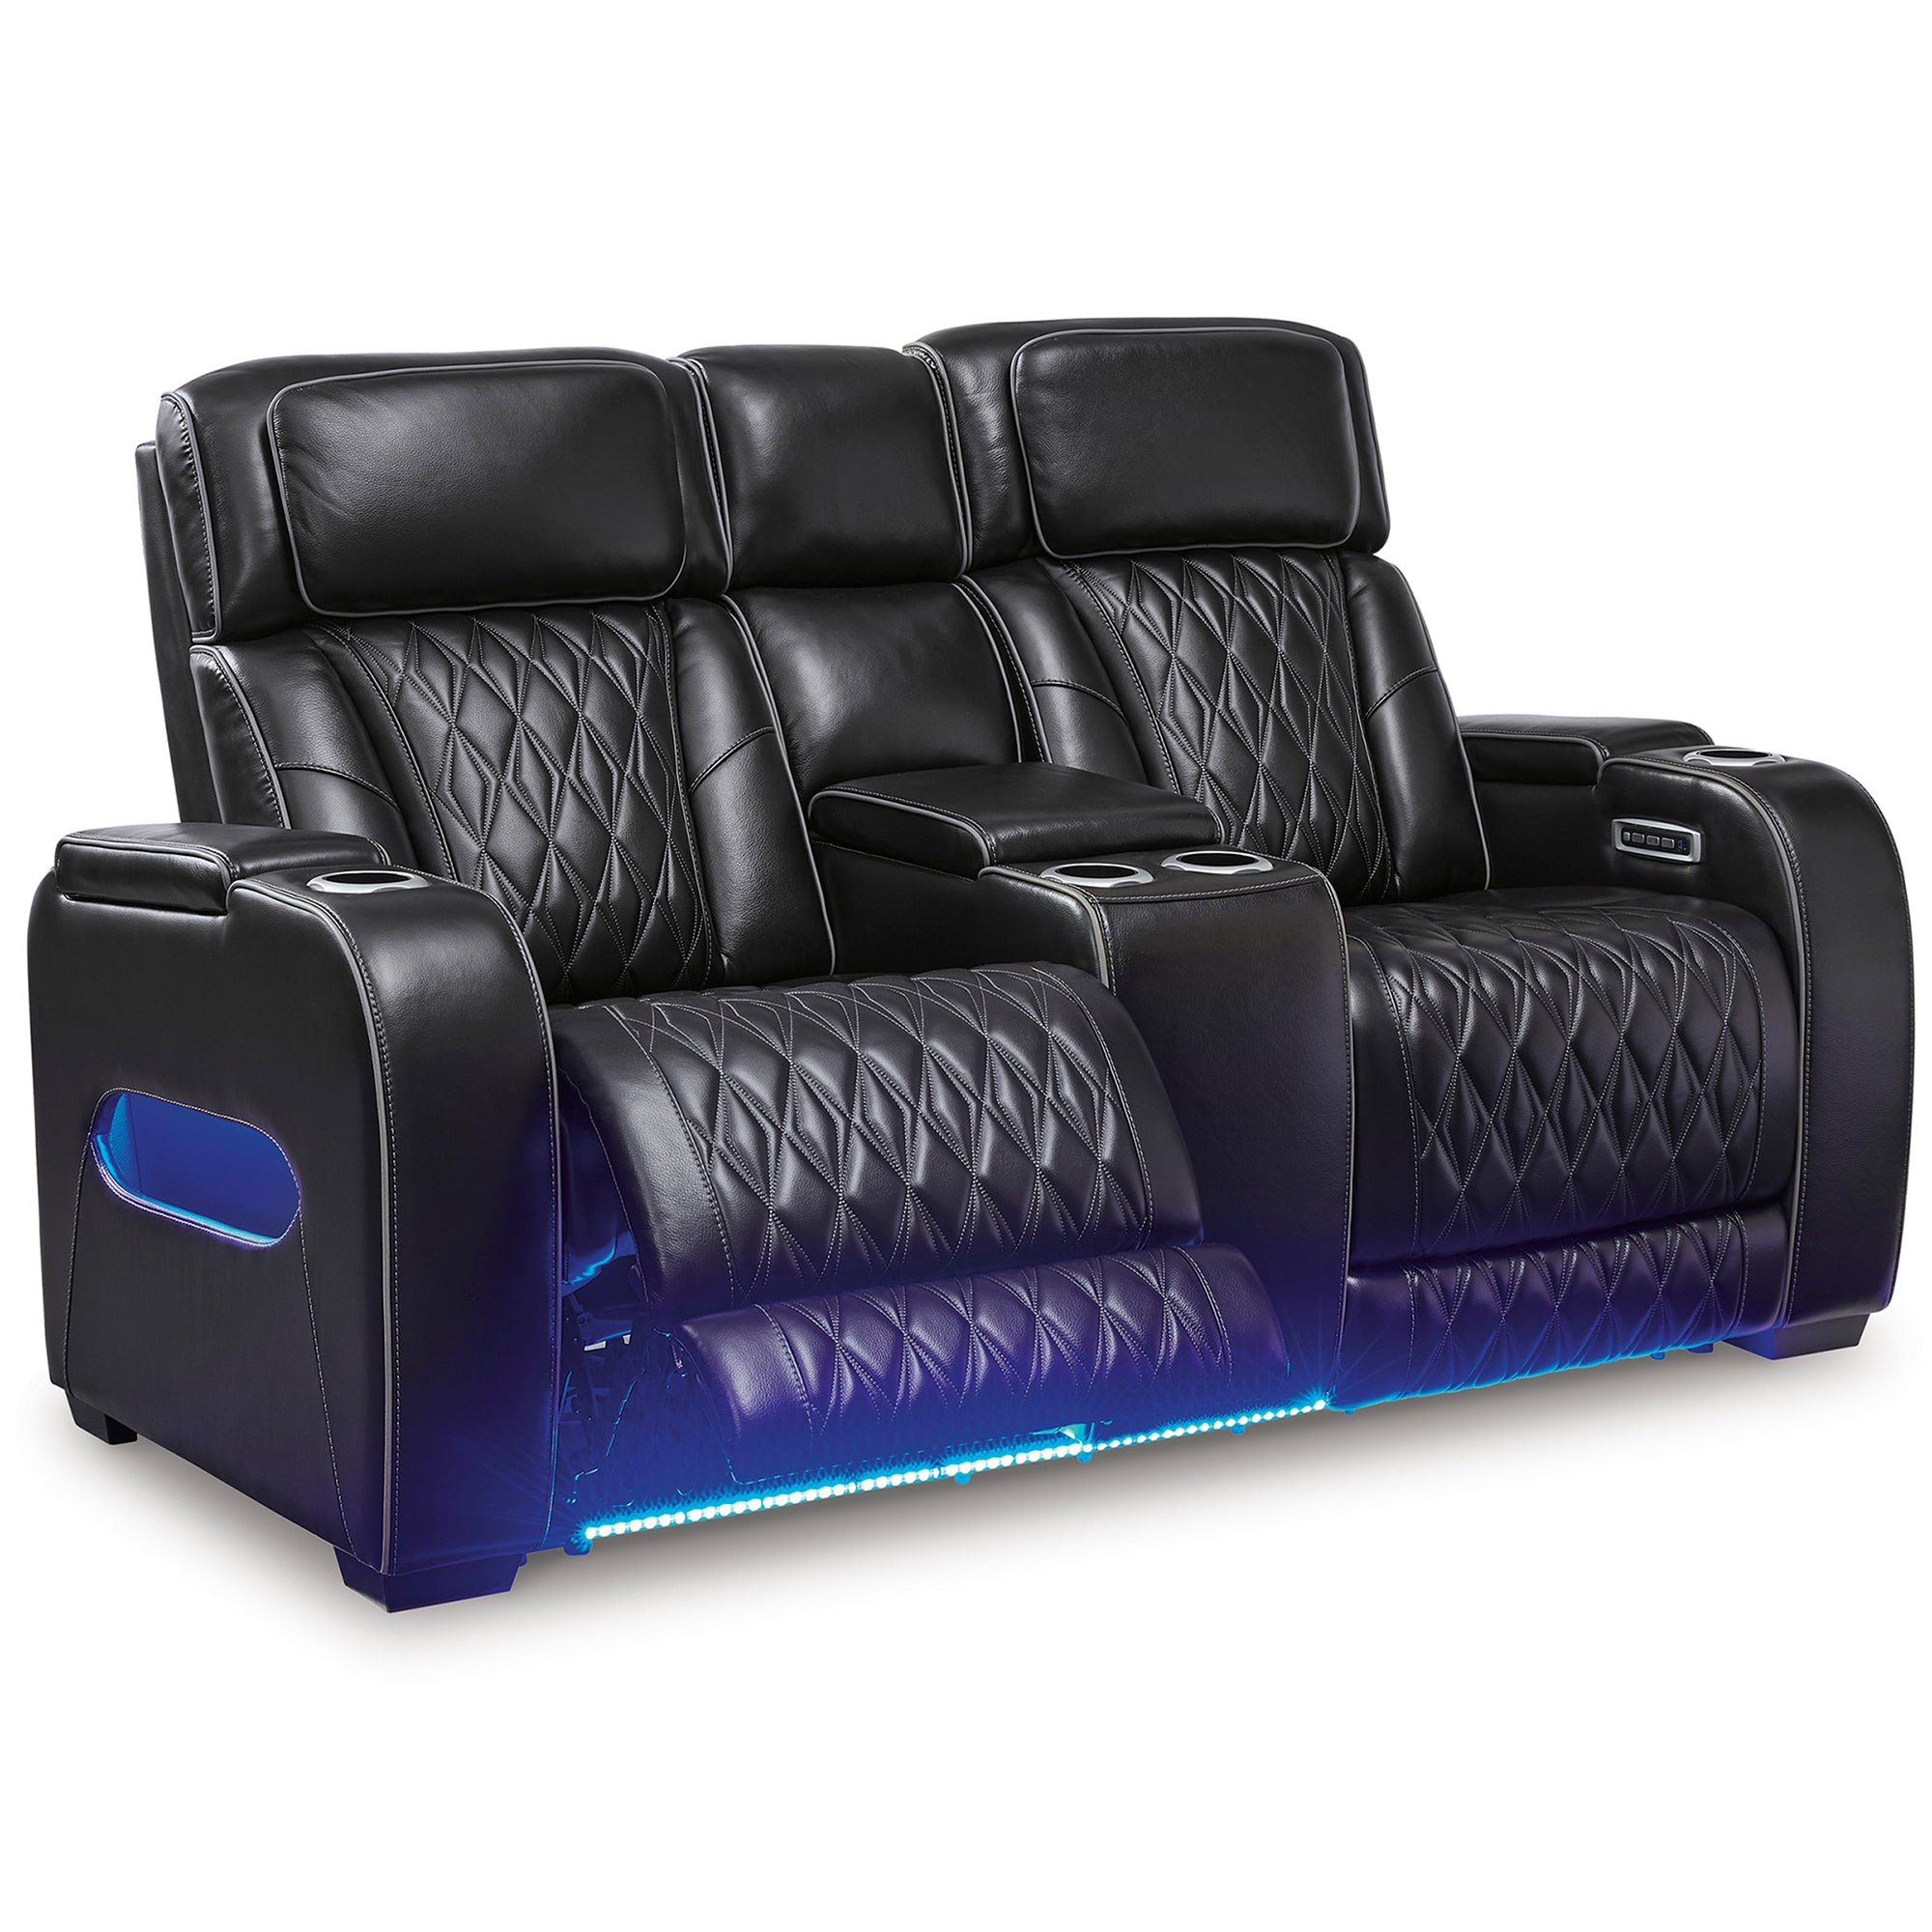 Boyington Triple Power Leather Reclining Loveseat with Console and Massage